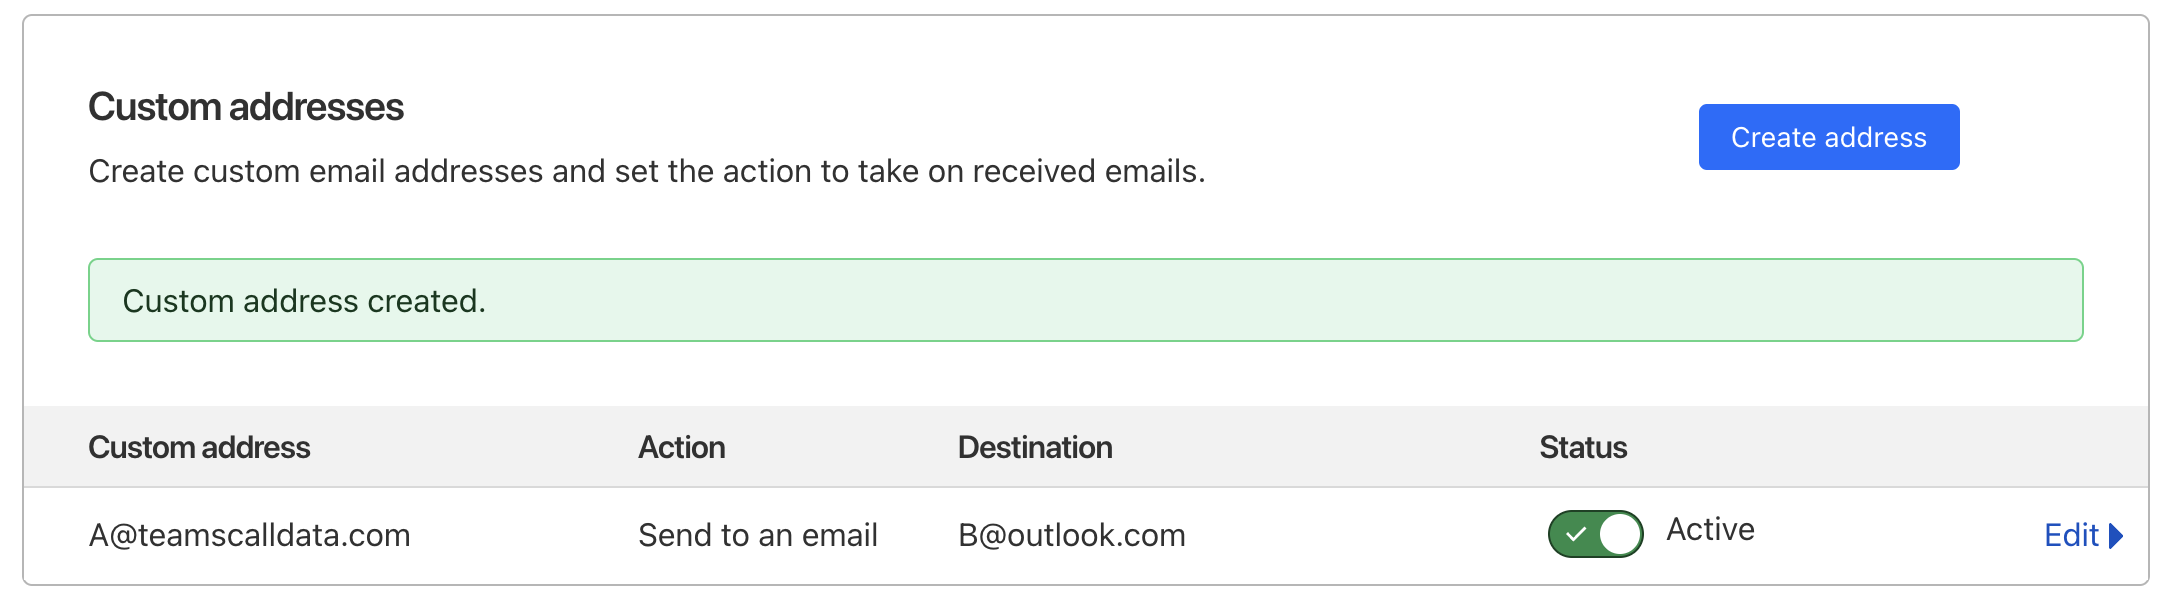 Cloudflare Simple Email Forwarding